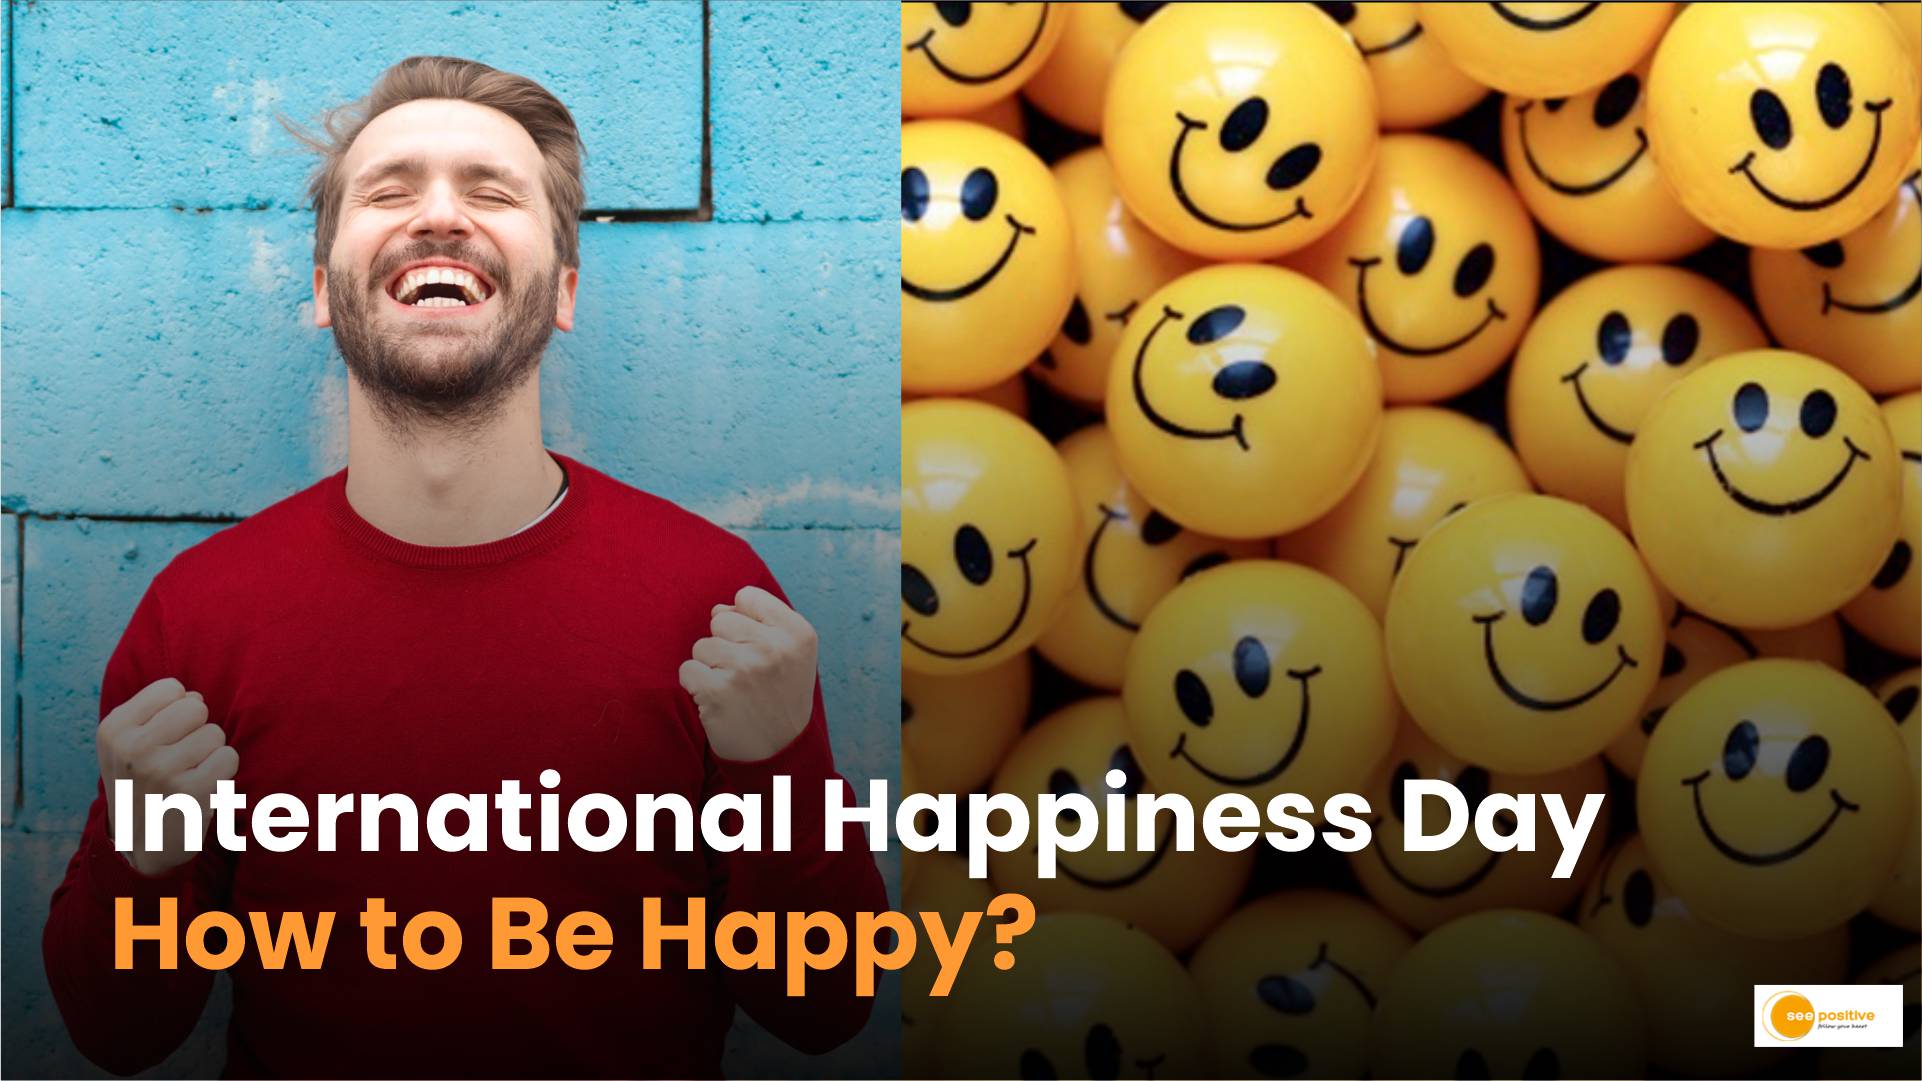 How to Be Happy? Simple Habits Recommended by Experts